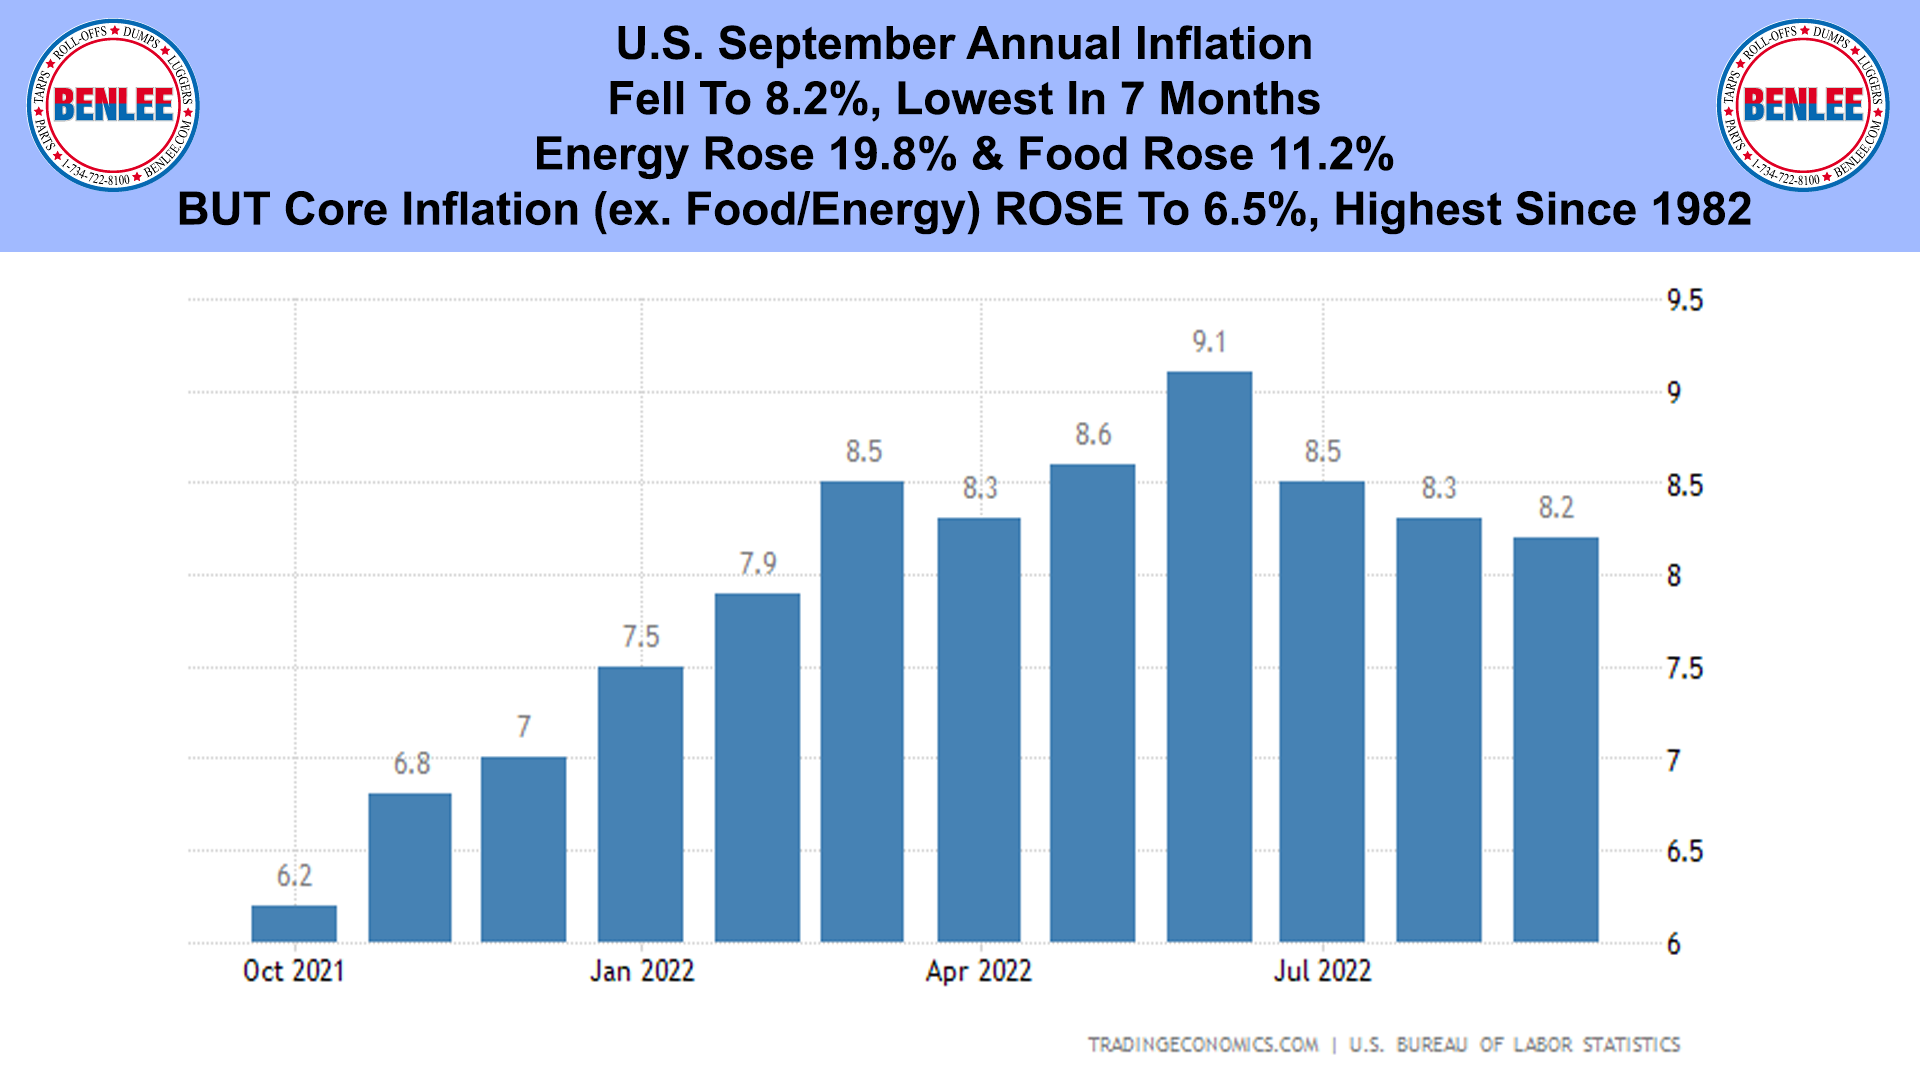 U.S. September Annual Inflation